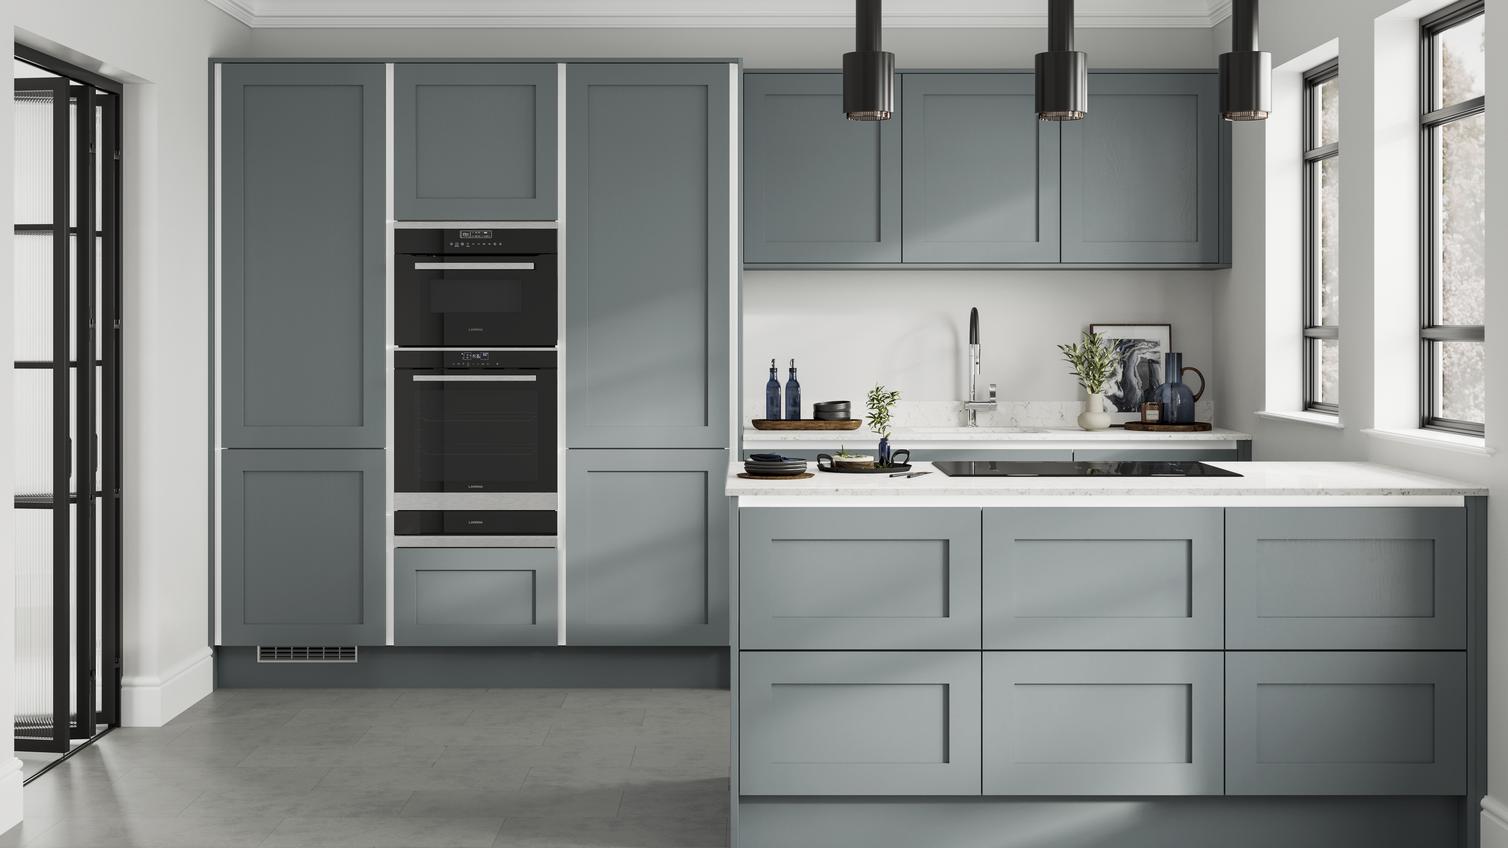 Handleless dusk-blue shaker kitchen with white trims in a peninsula layout. Contains double drawer units and grey floors.